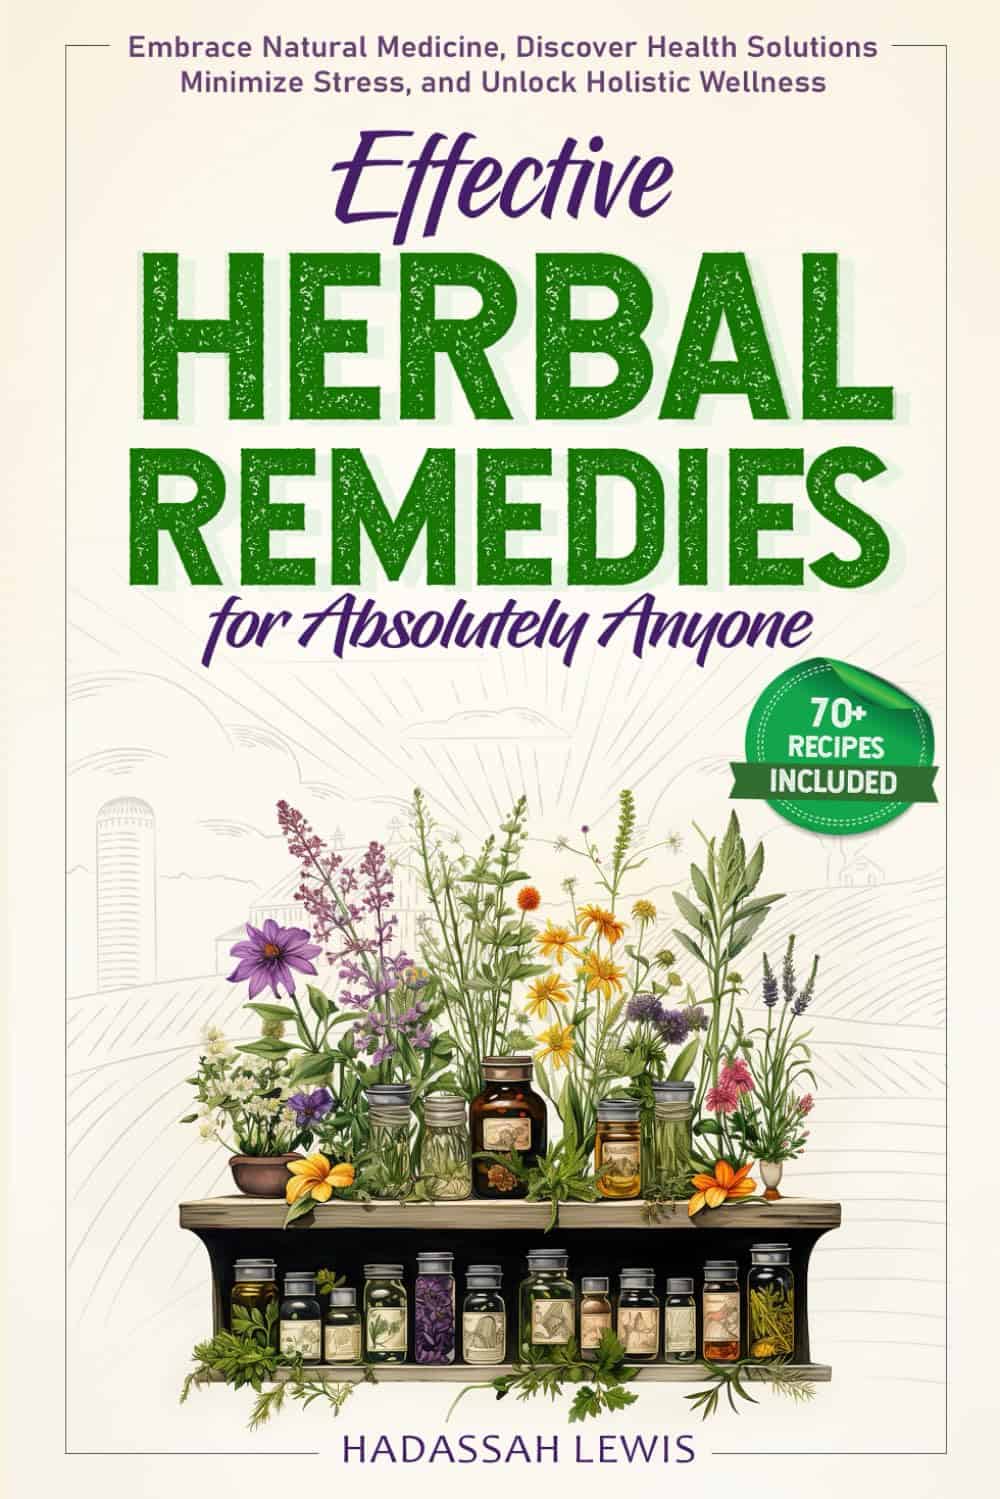 A Comprehensive Guide to Natural Healing – A Must-Have Book for Everyone